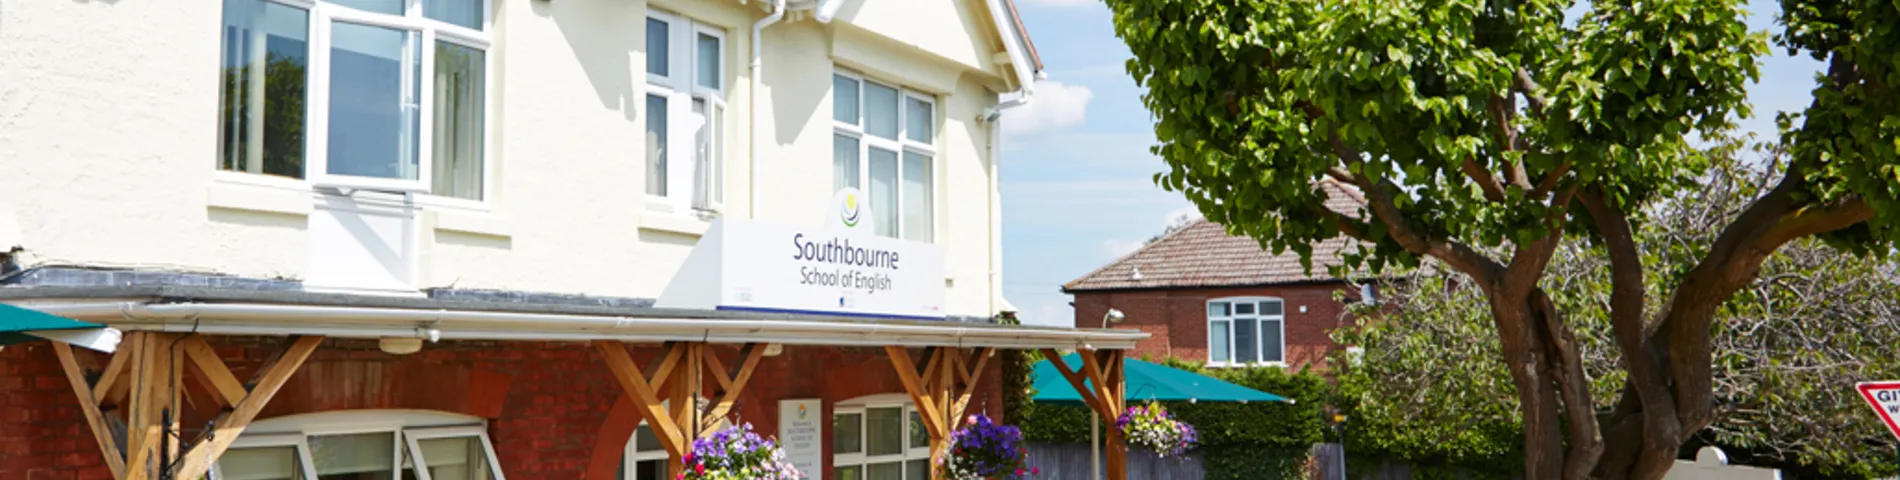 Southbourne School of English afbeelding 1